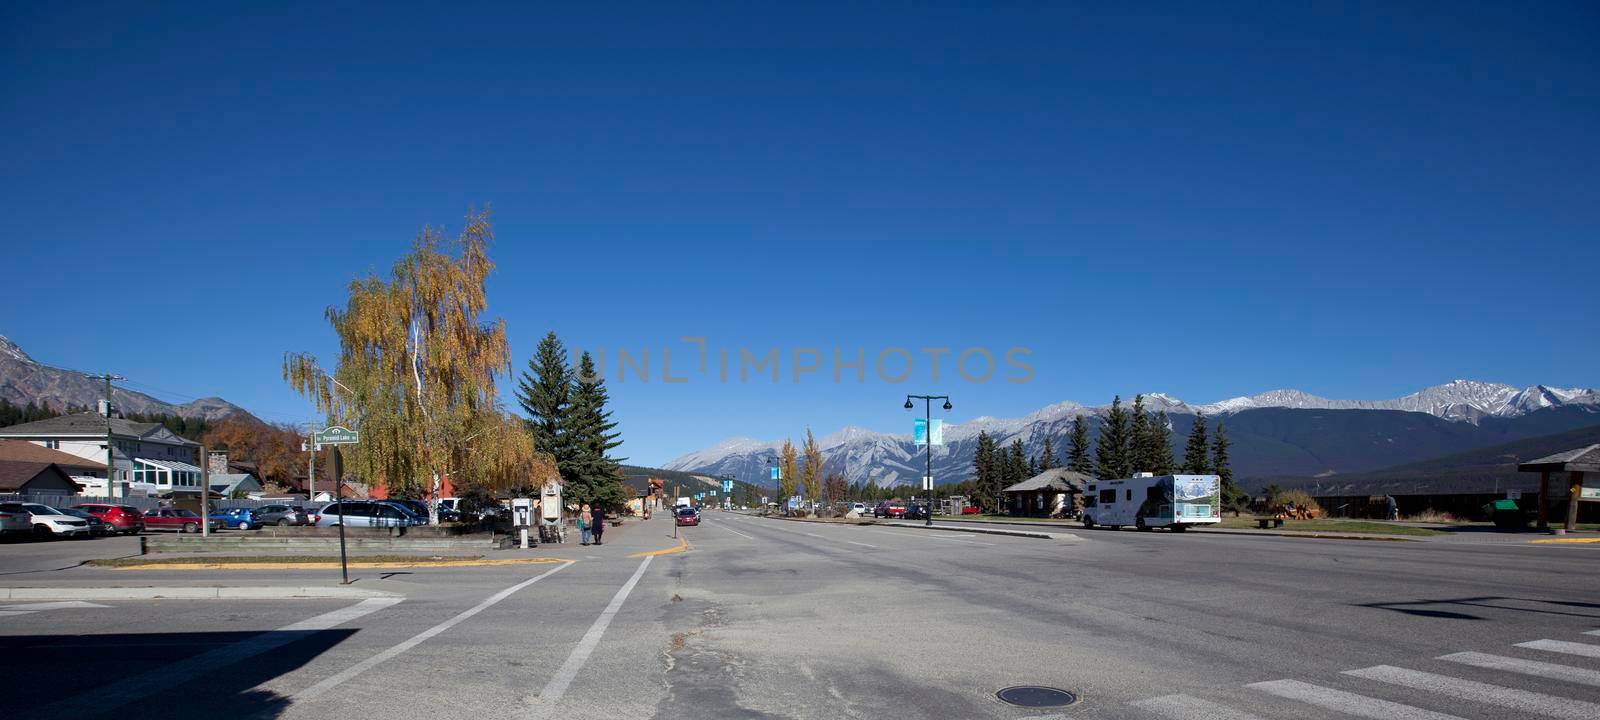  October 5, 2017: downtown Jasper, Alberta with a view of the rocky mountains on the corner of Connaught and Pyramid Lake Road